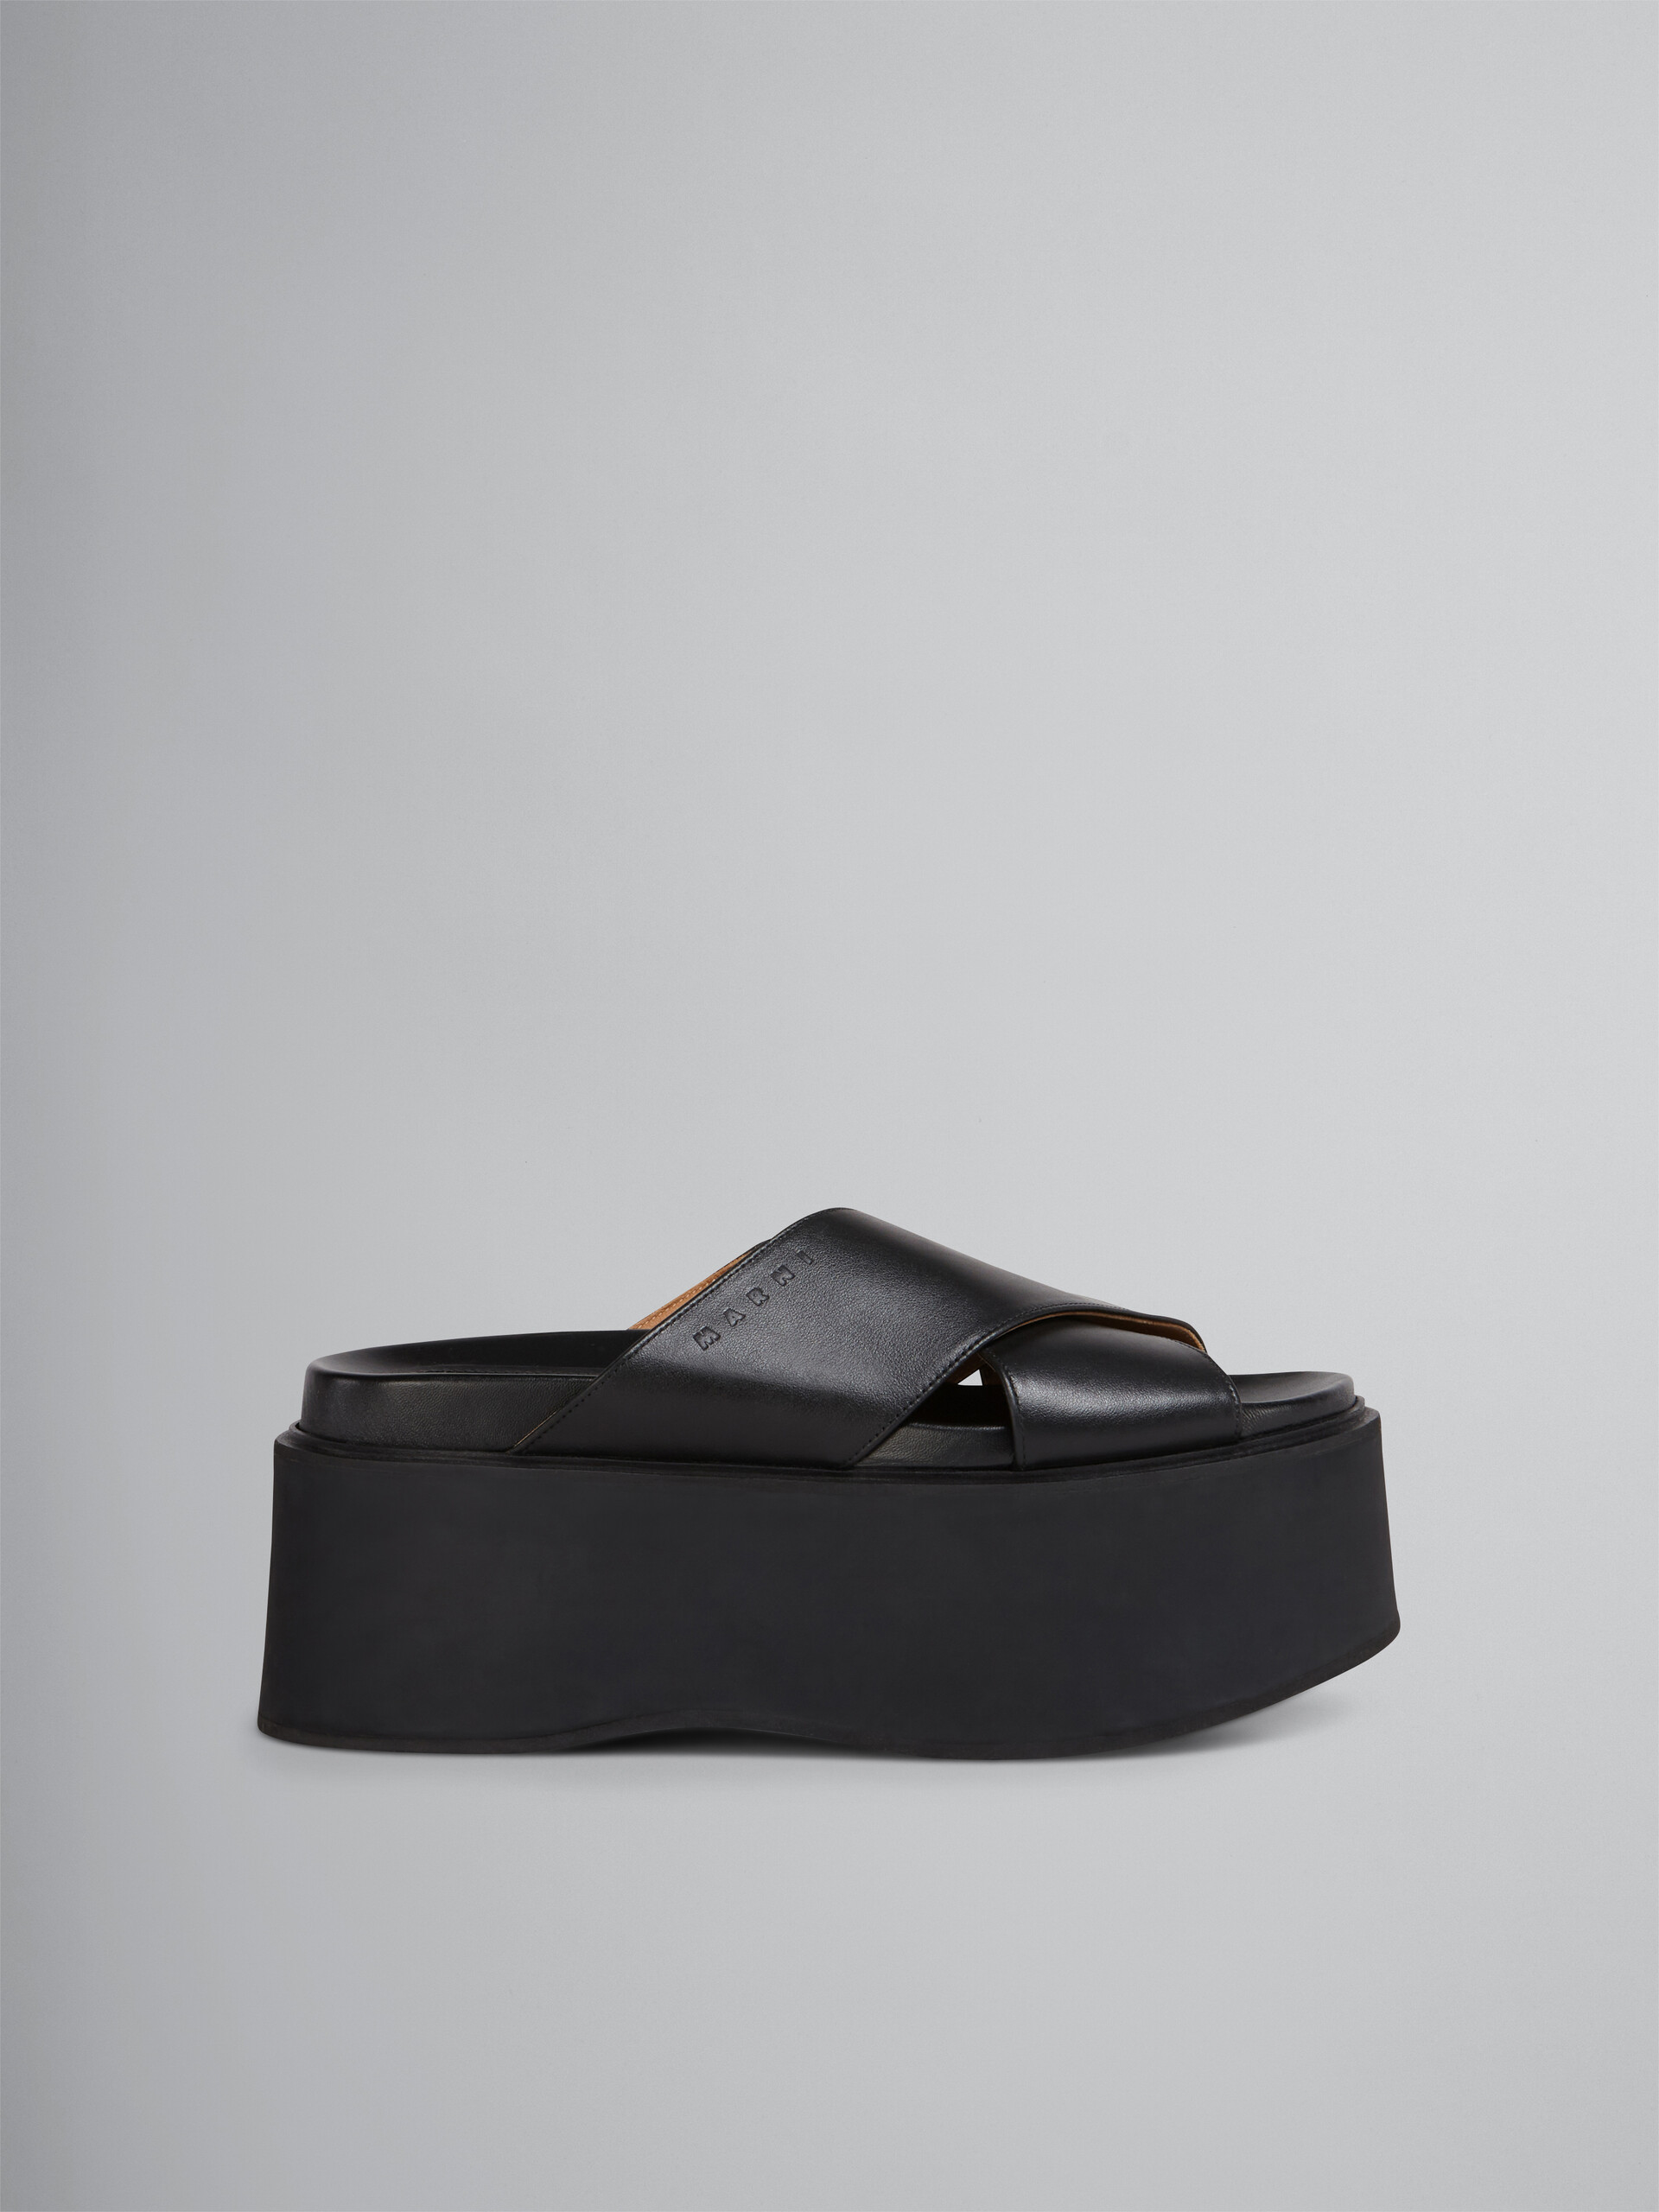 Criss-cross wedge in black calf leather - Sandals - Image 1